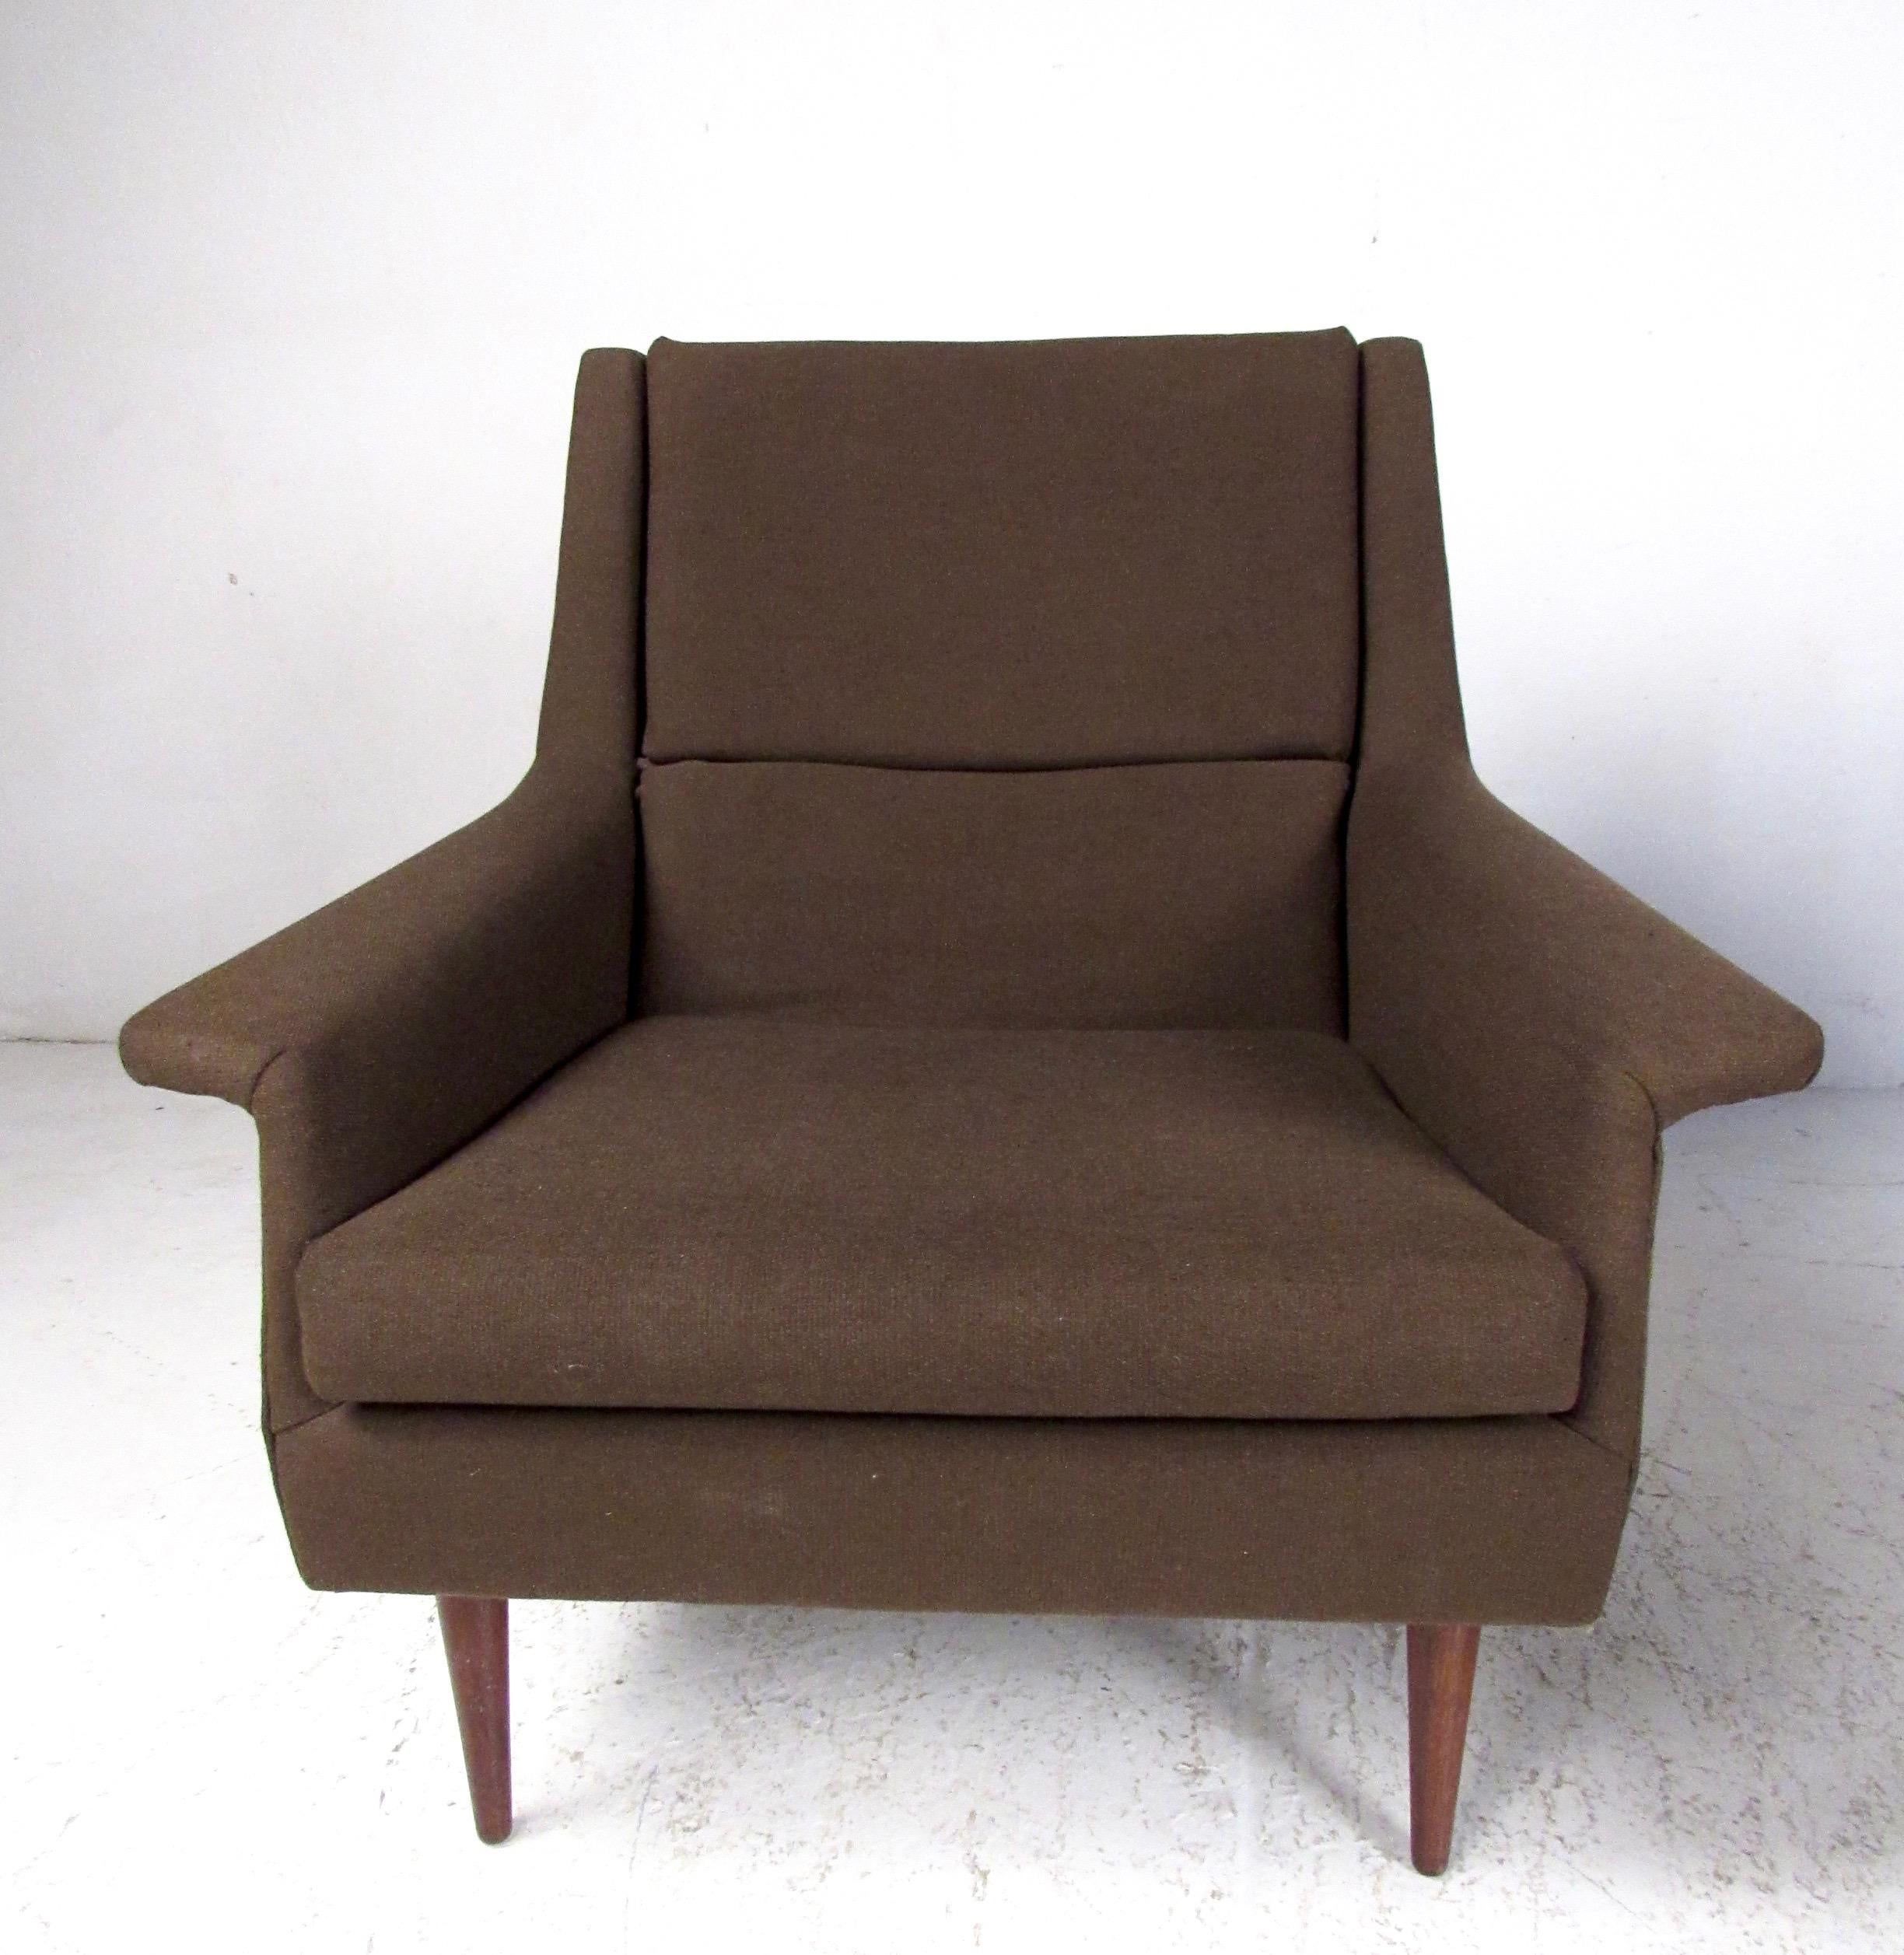 Mid-20th Century Pair of Milo Baughman Upholstered Lounge Chairs For Sale